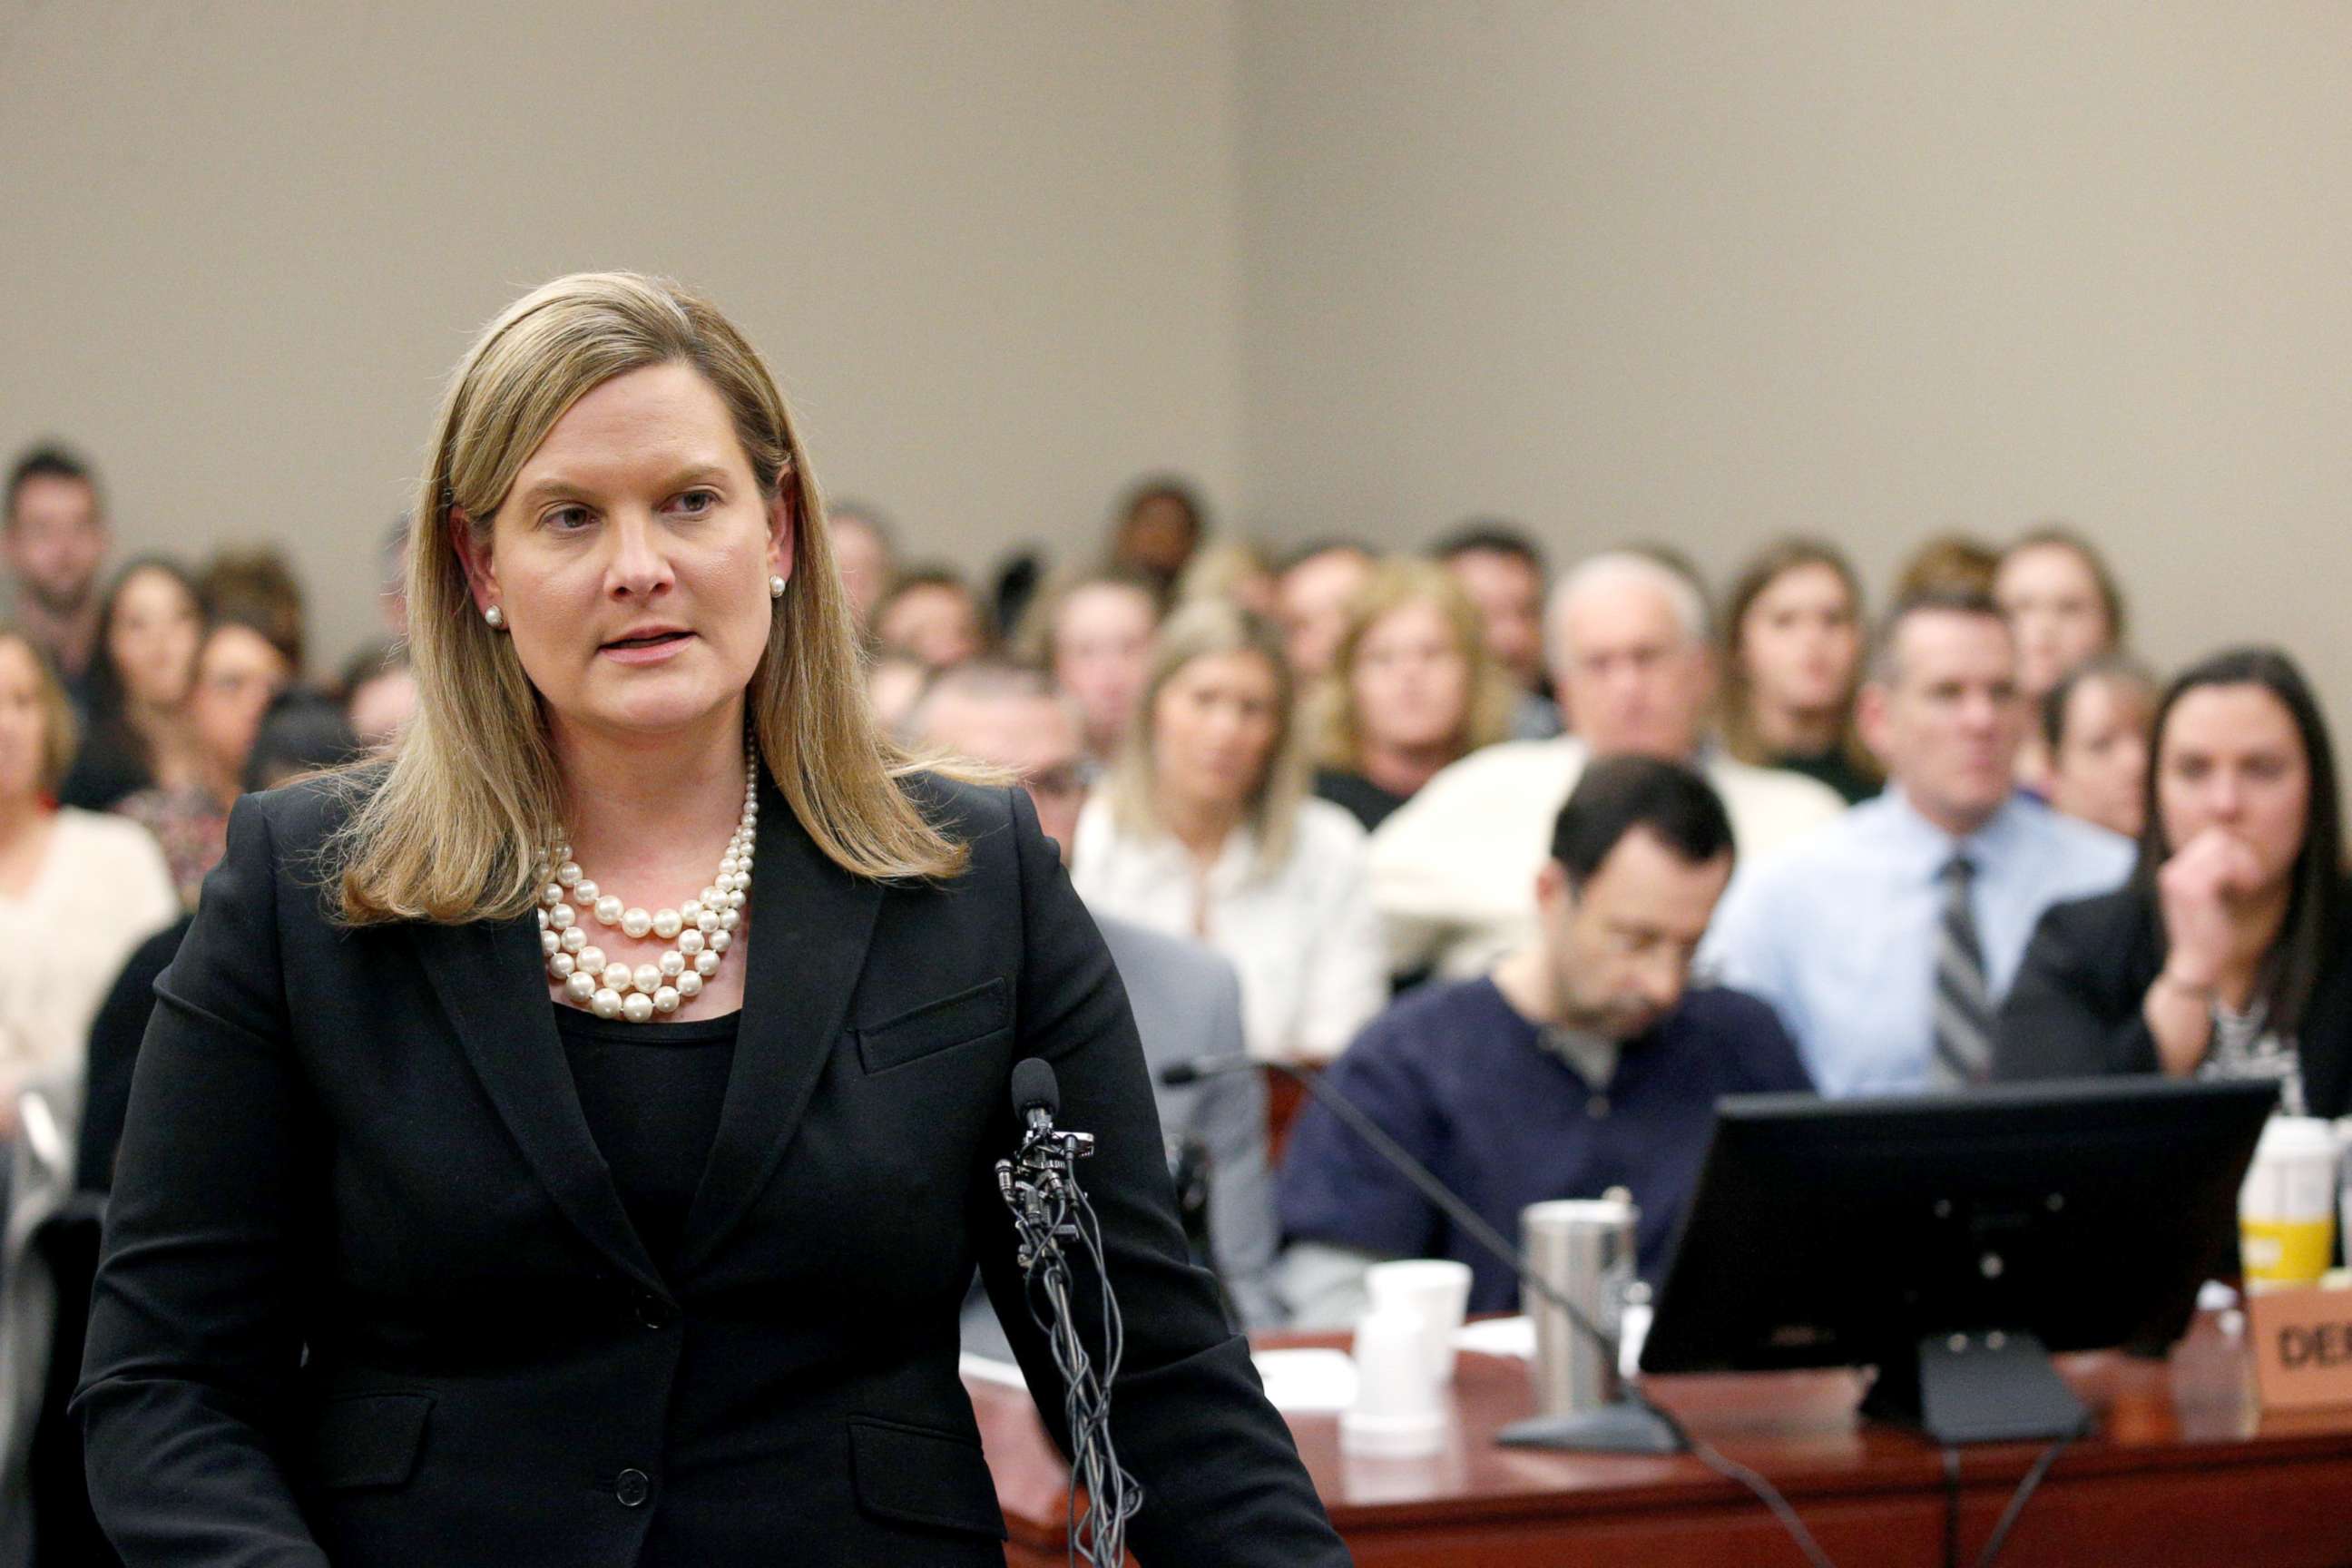 PHOTO: Prosecutor Angela Povilaitis speaks at the sentencing hearing for Larry Nassar, a former team USA Gymnastics doctor who pleaded guilty in Nov. 2017 to sexual assault charges, in Lansing, Michigan, Jan. 24, 2018. 